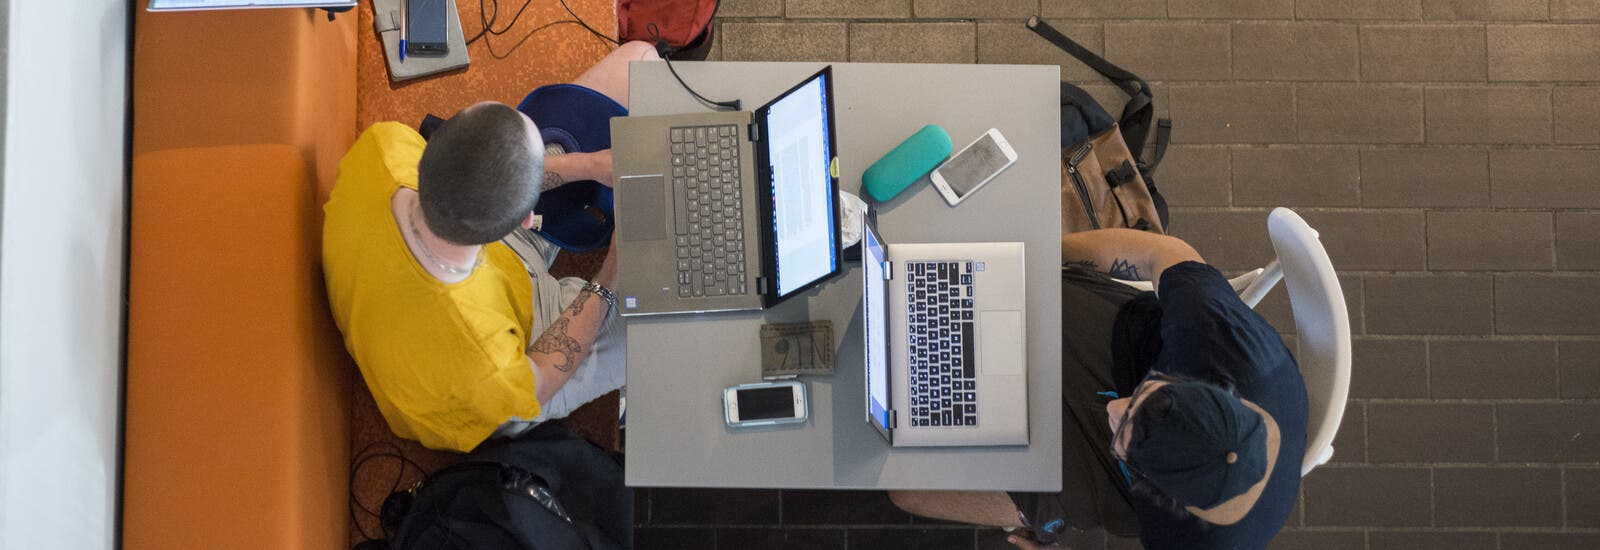 Two students studying remotely on laptops in a cafe